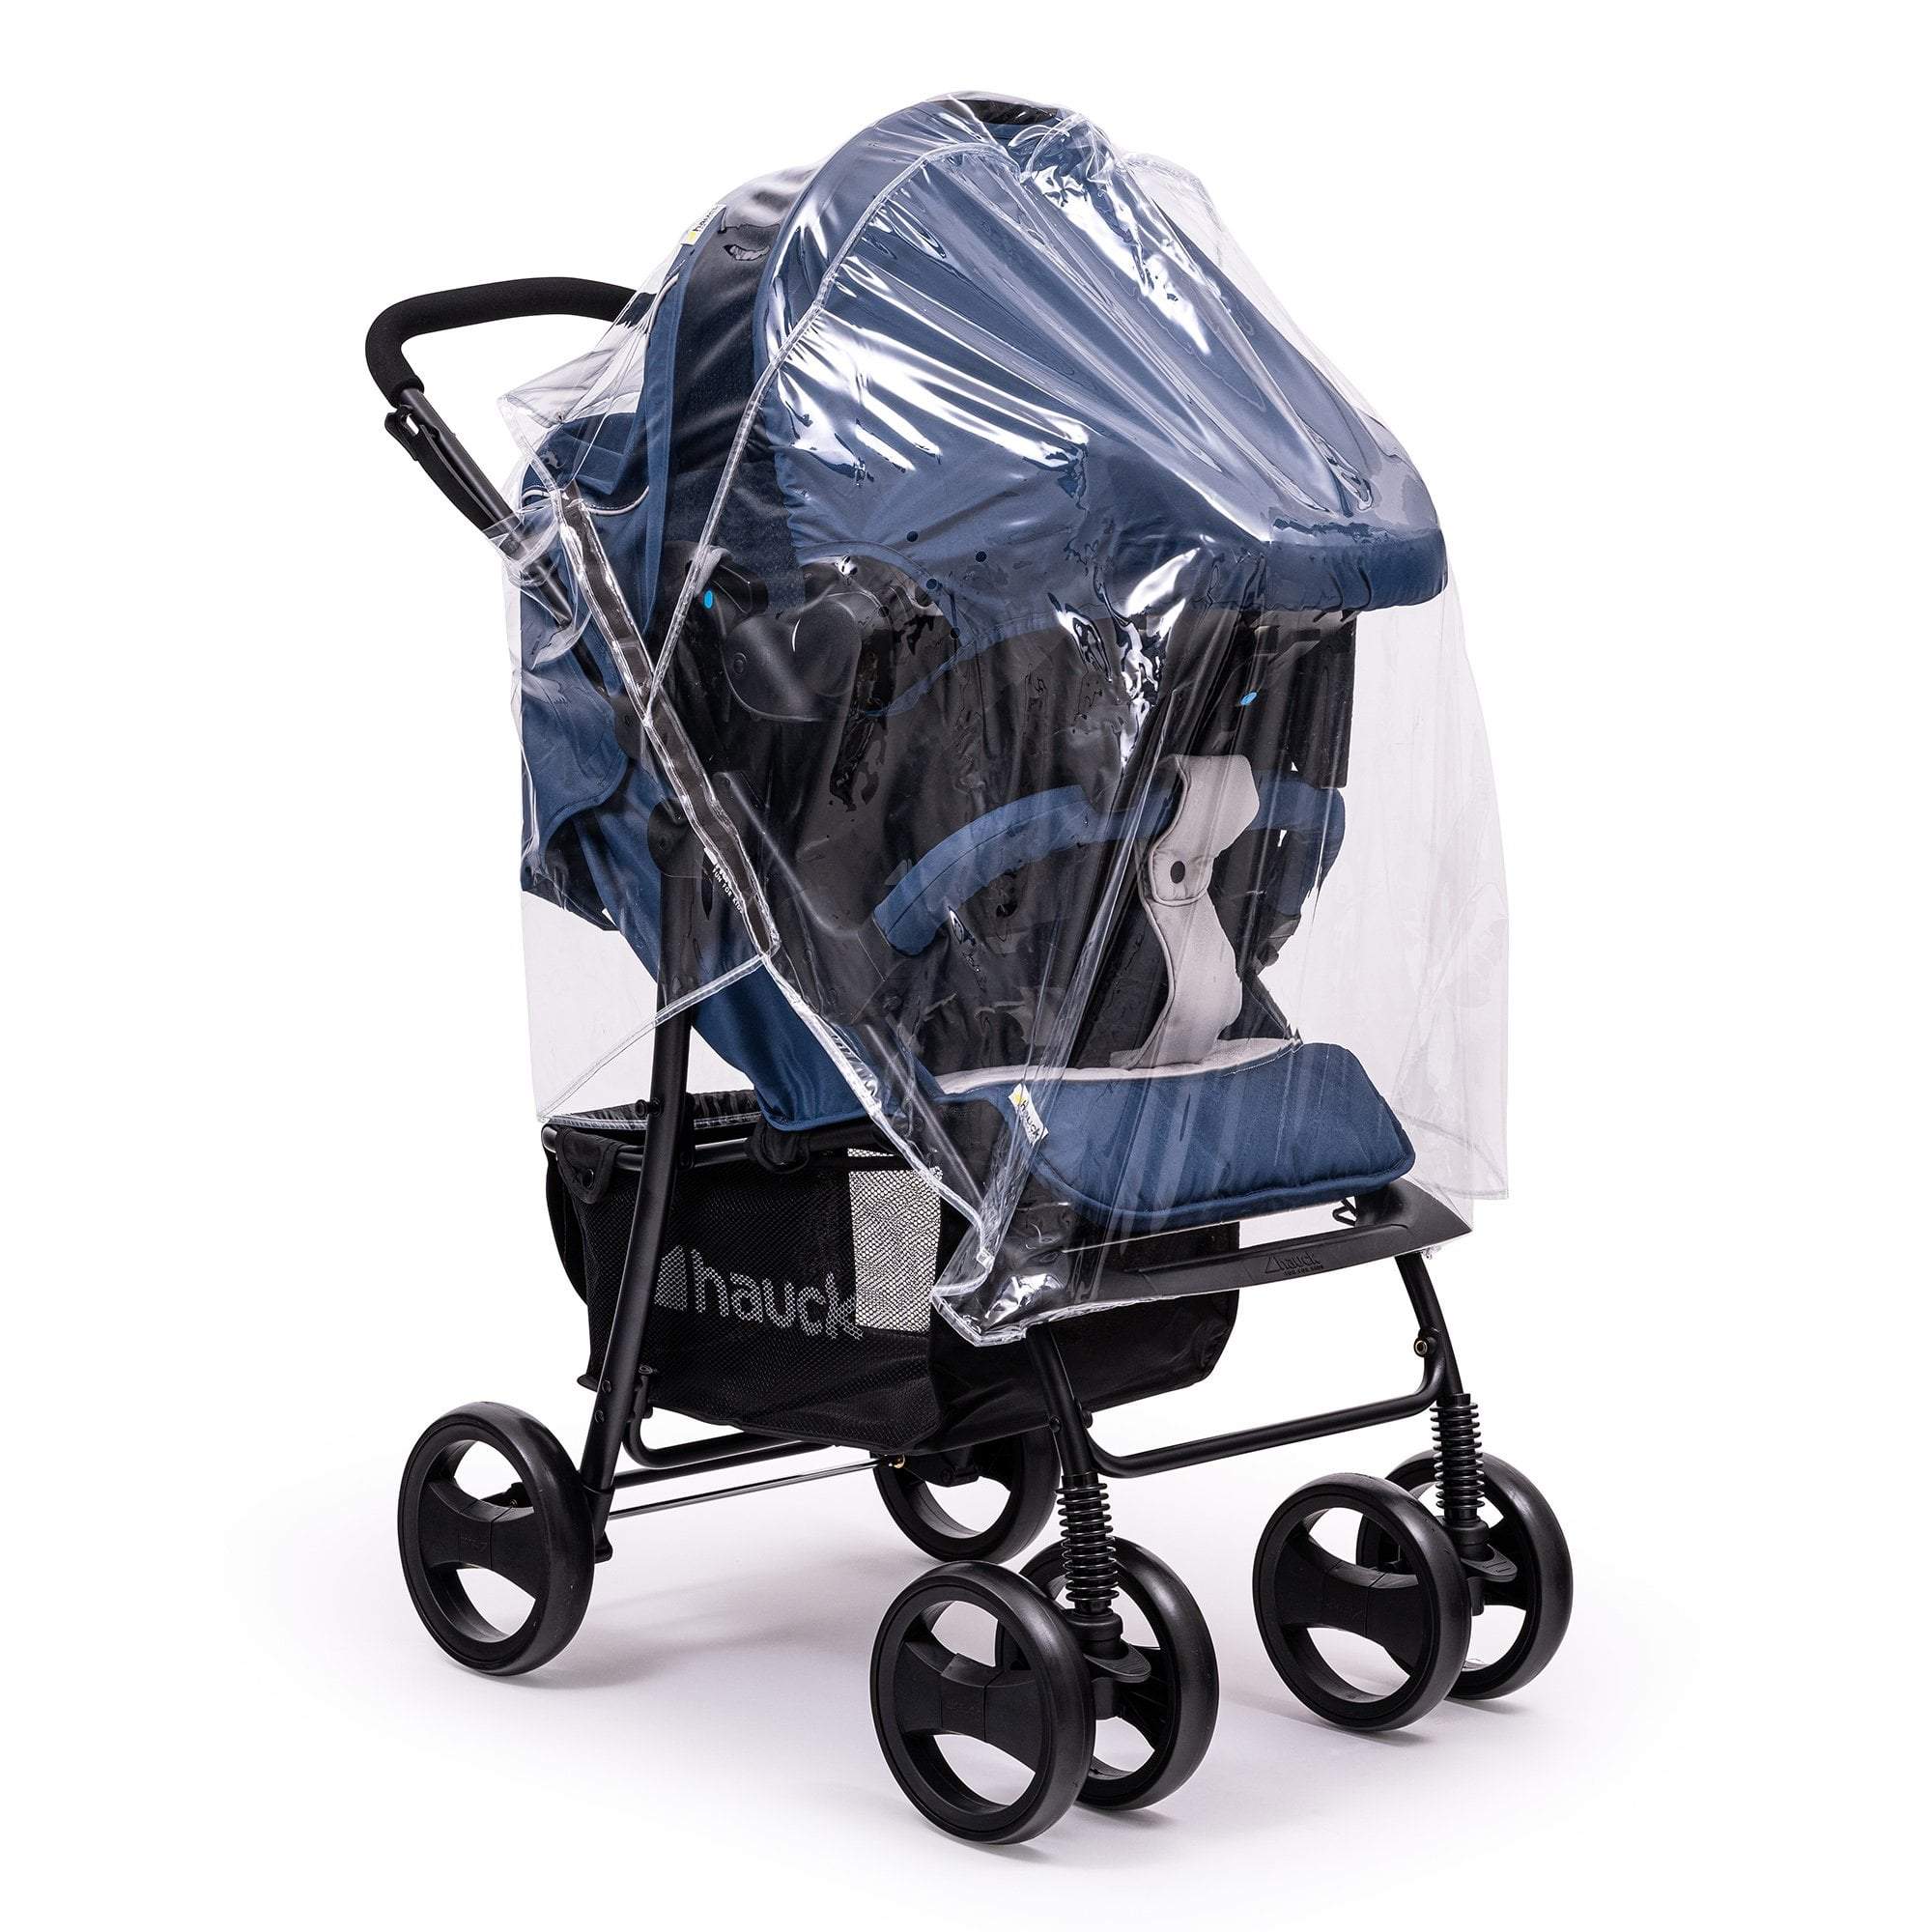 Travel System Raincover Compatible with Norton - Fits All Models - For Your Little One